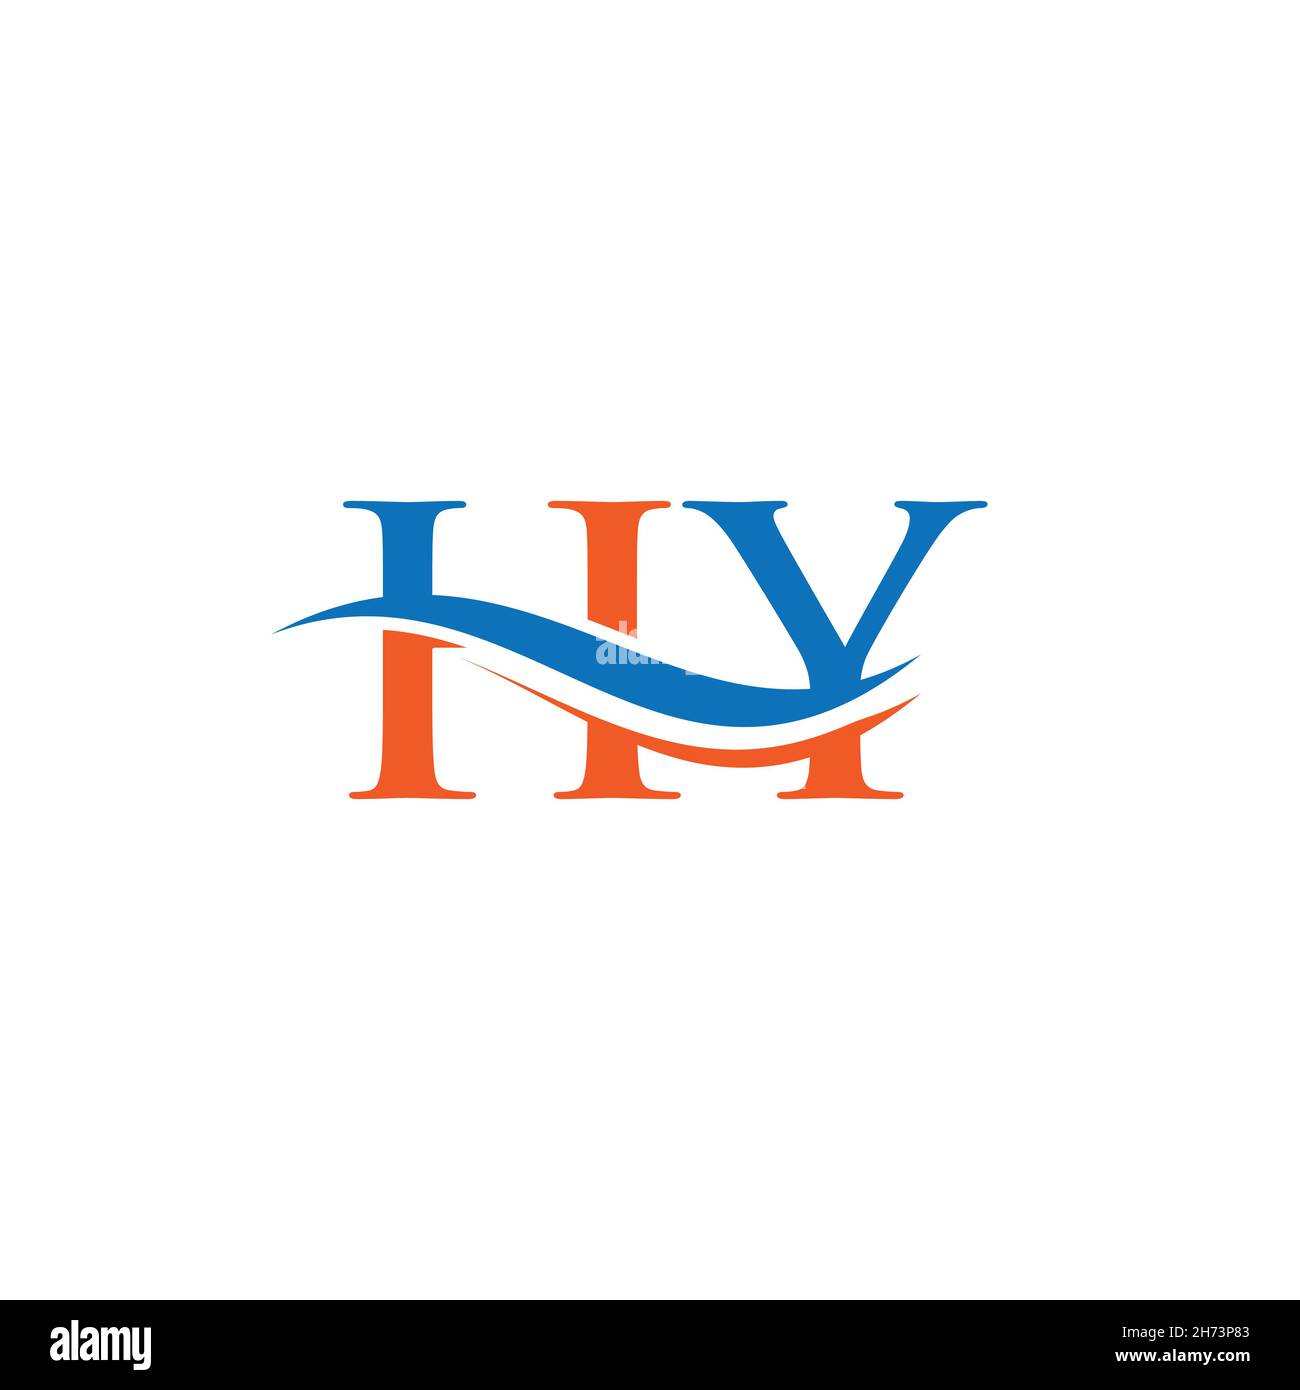 HY Linked Logo for business and company identity. Creative Letter HY Logo Vector Stock Vector